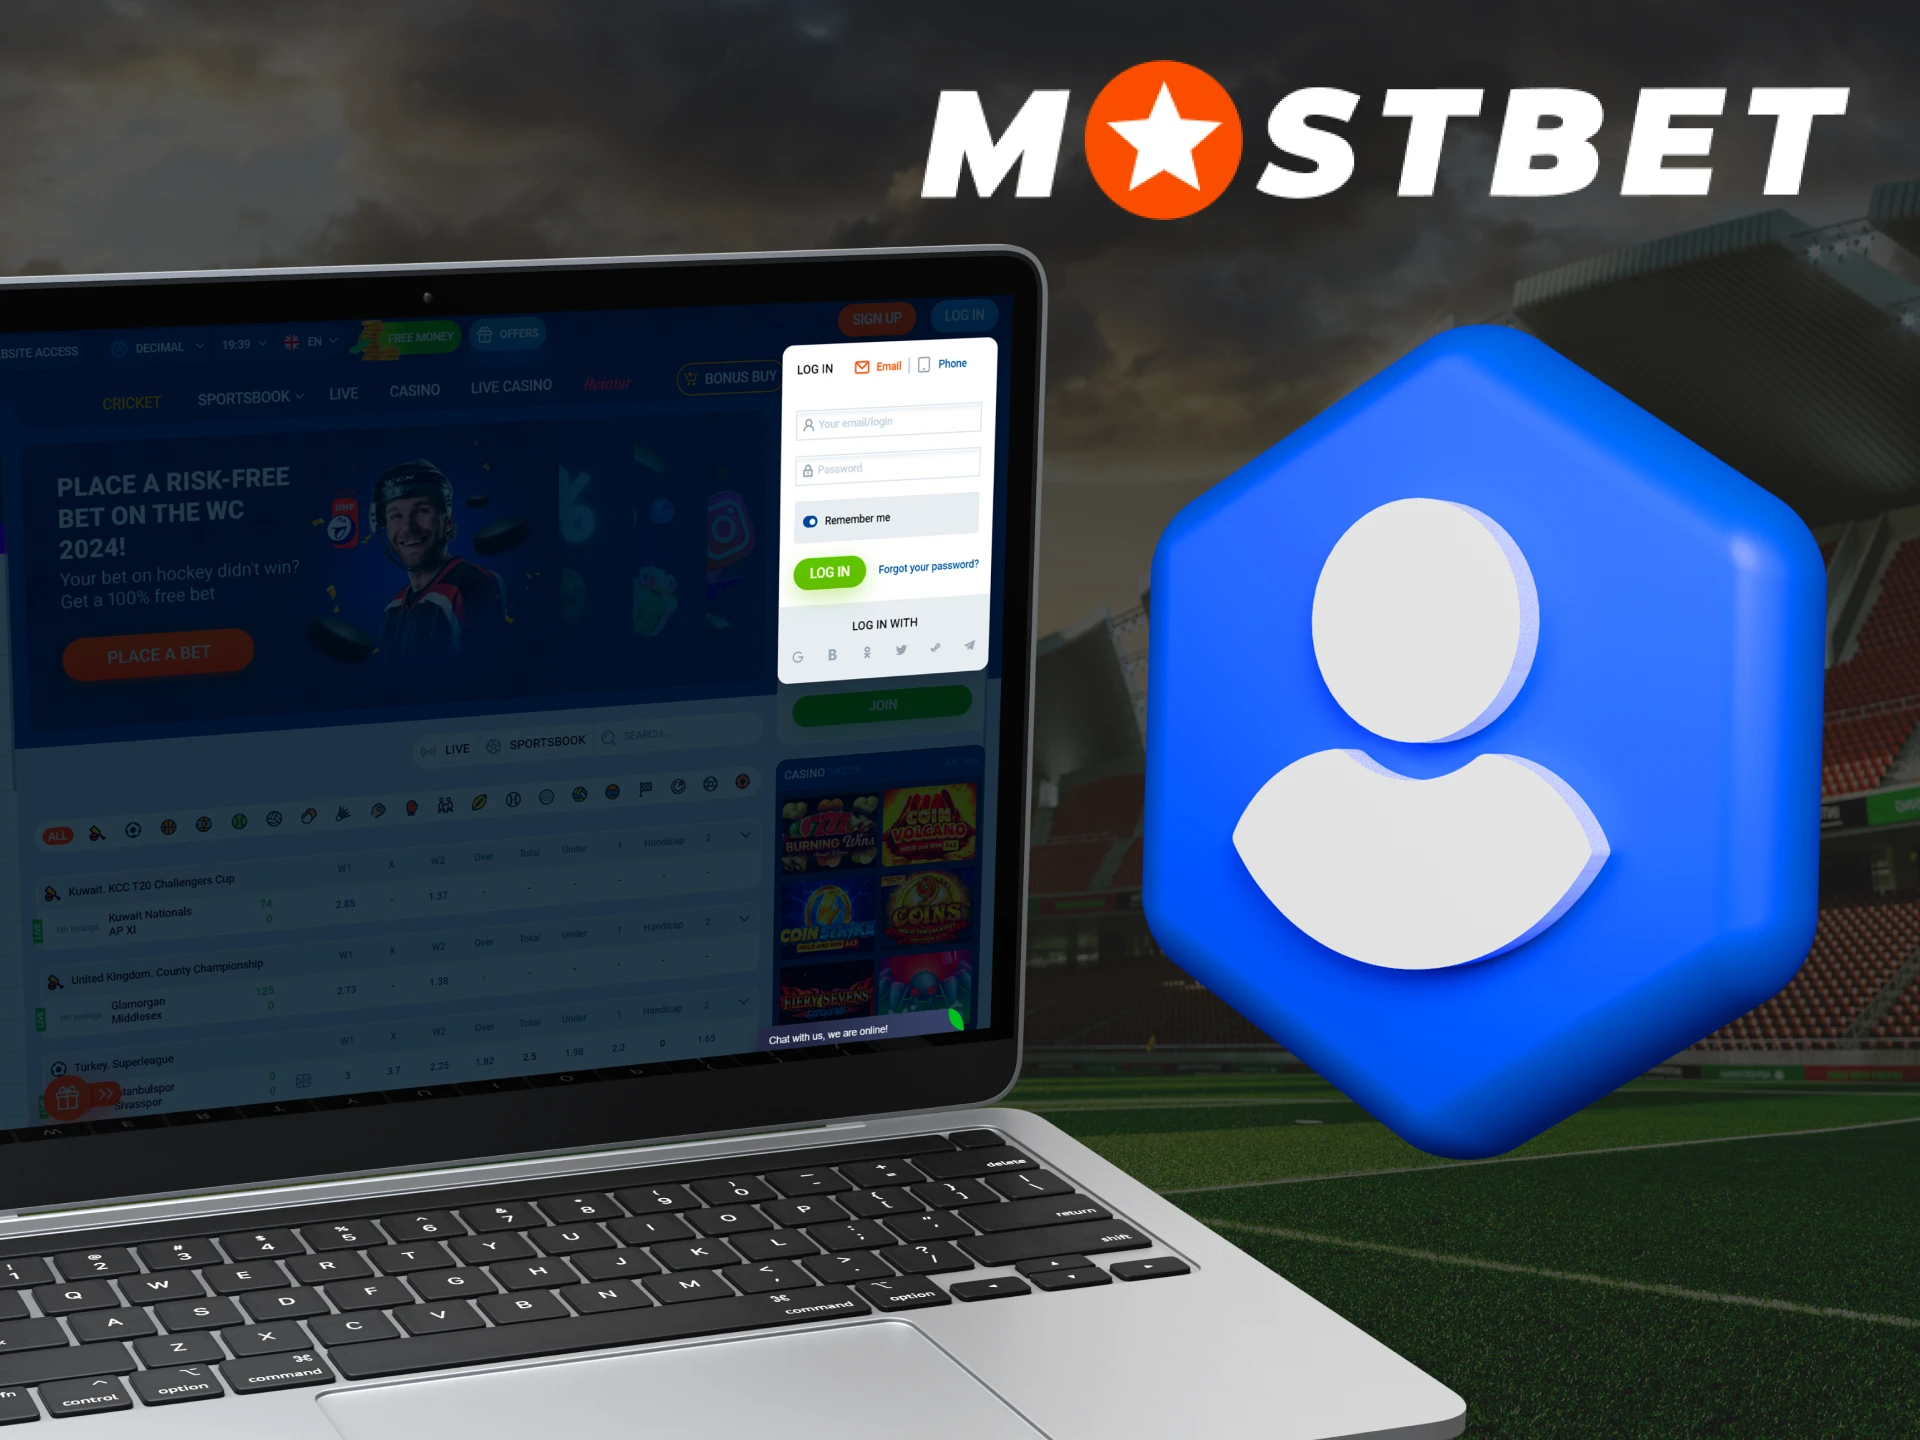 Log into your Mostbet account in seconds.